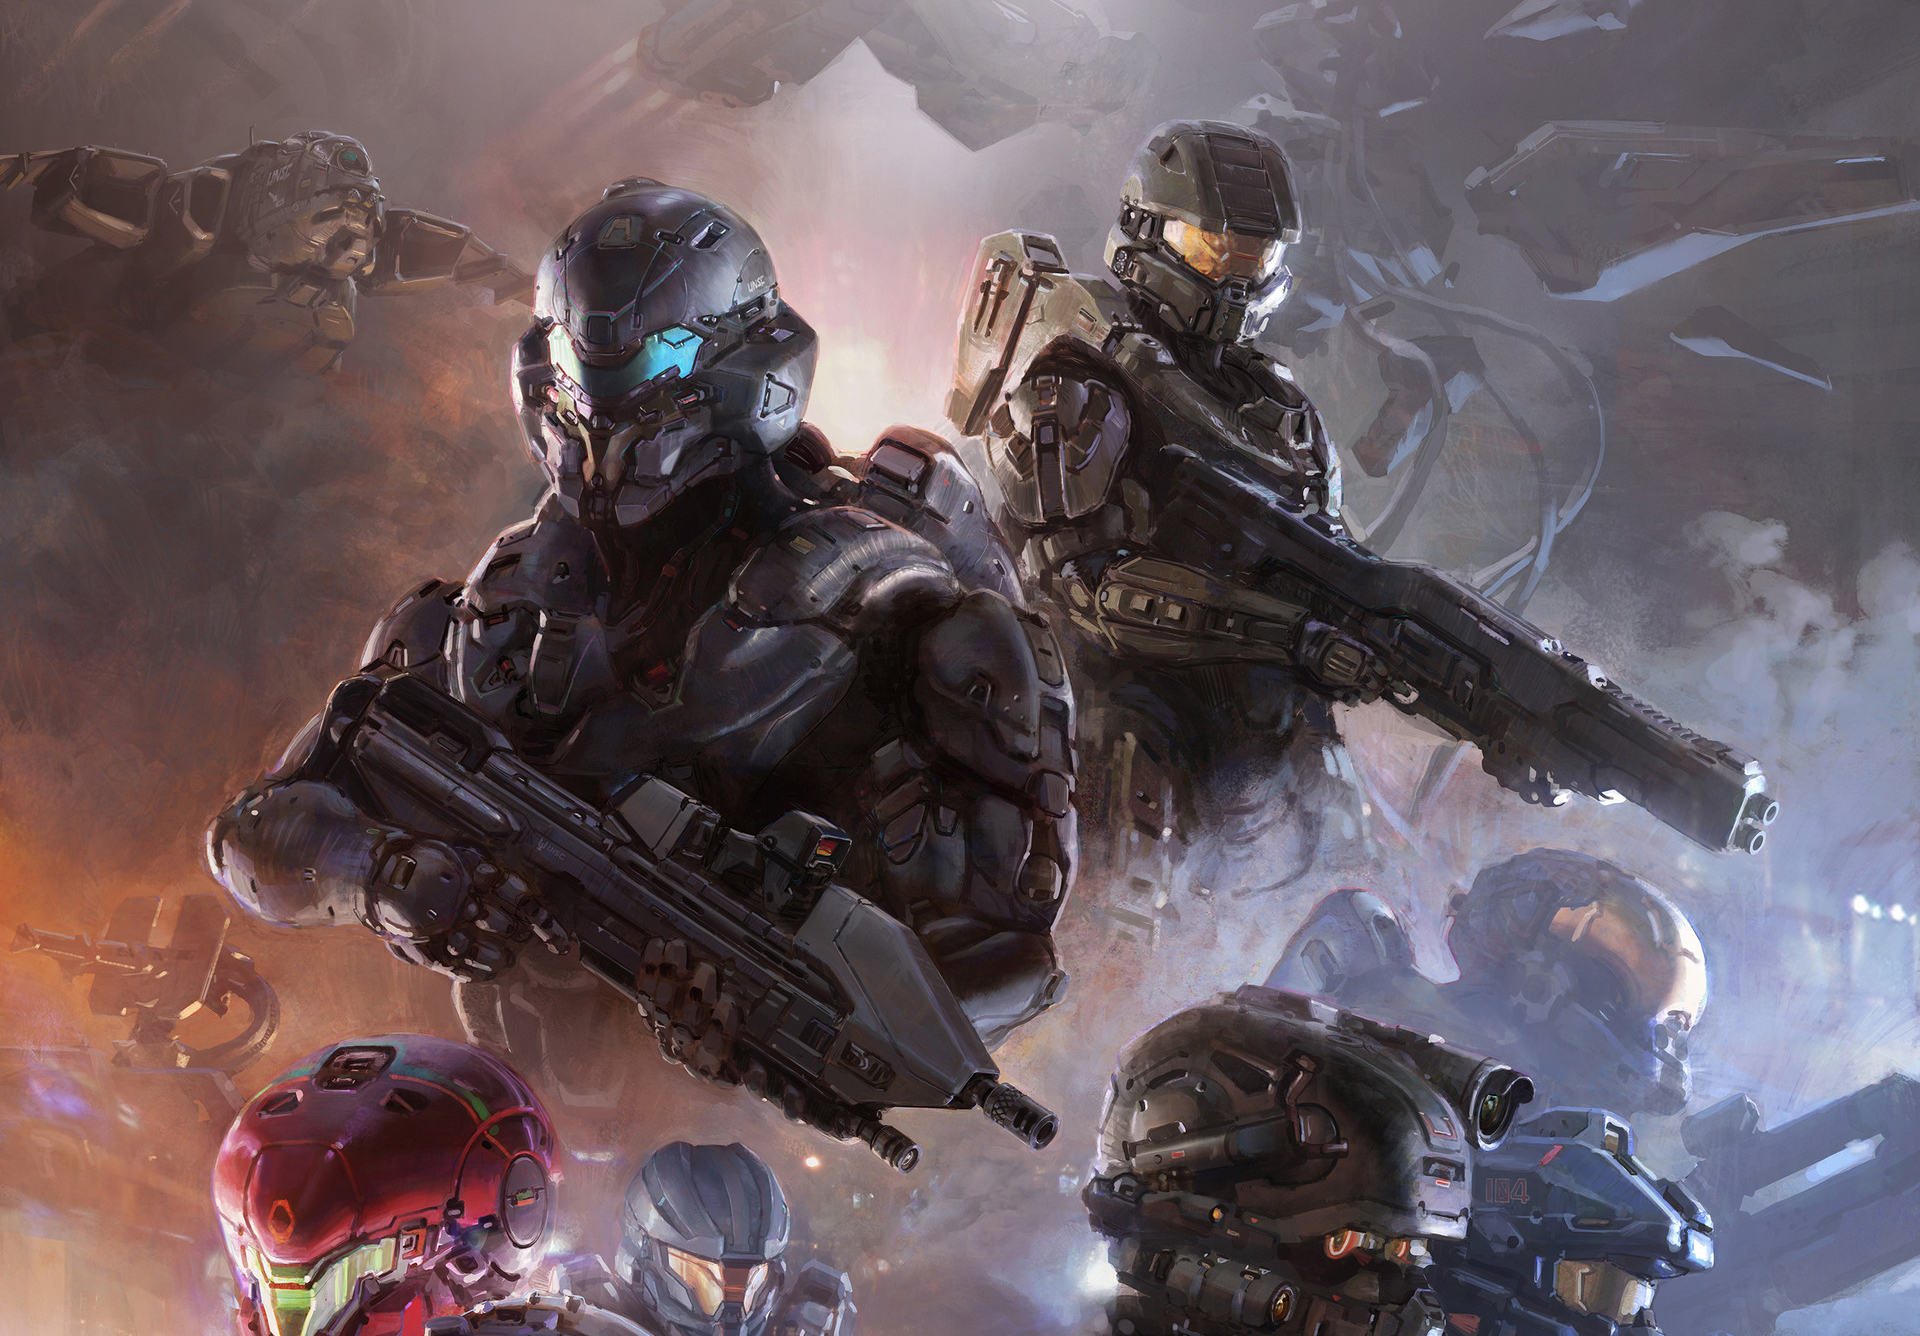 Free download wallpaper Weapon, Halo, Warrior, Armor, Futuristic, Video Game, Master Chief, Halo 5: Guardians on your PC desktop